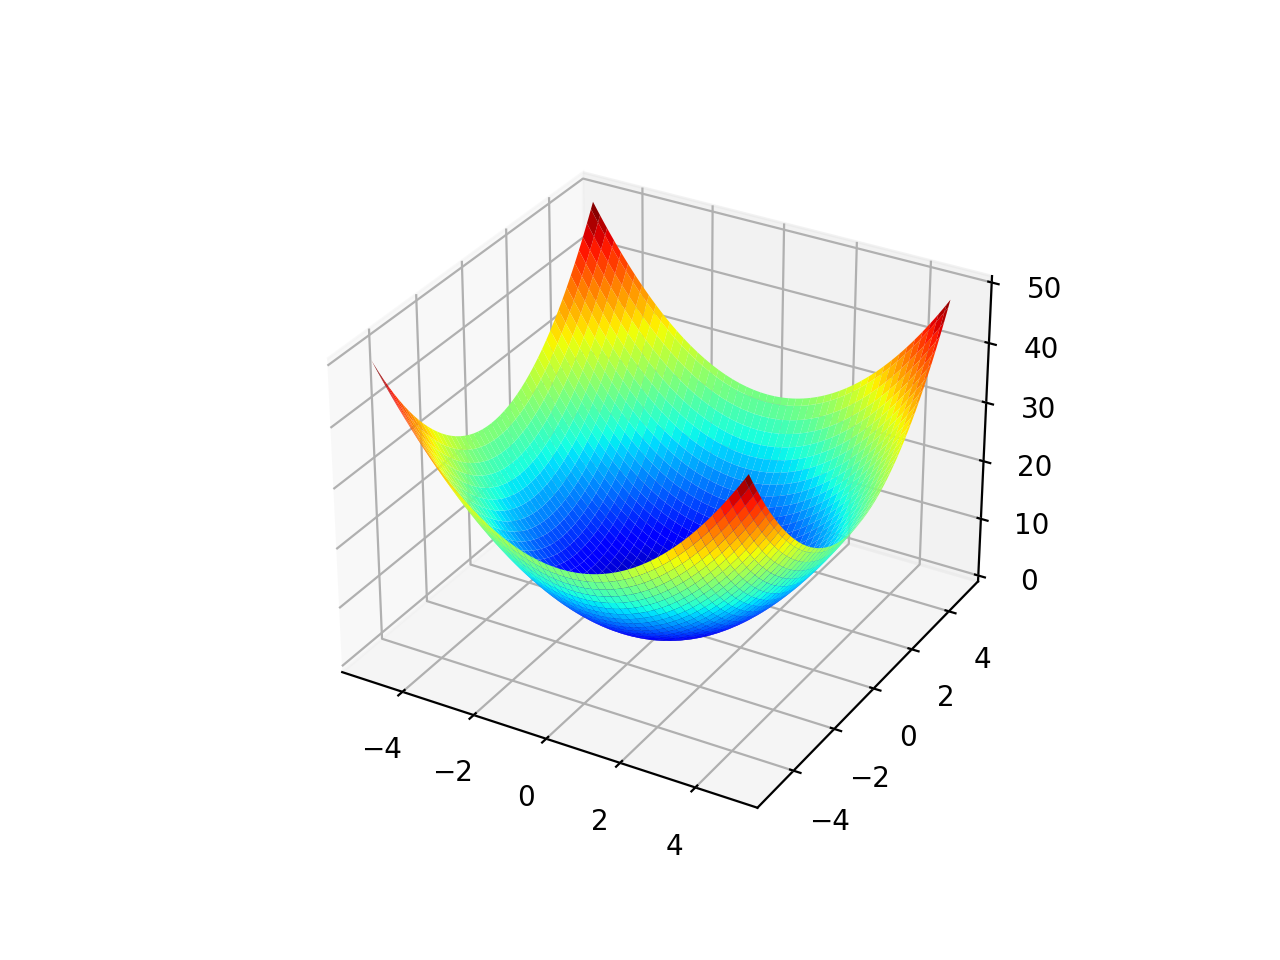 Visualization for Function Optimization in Python